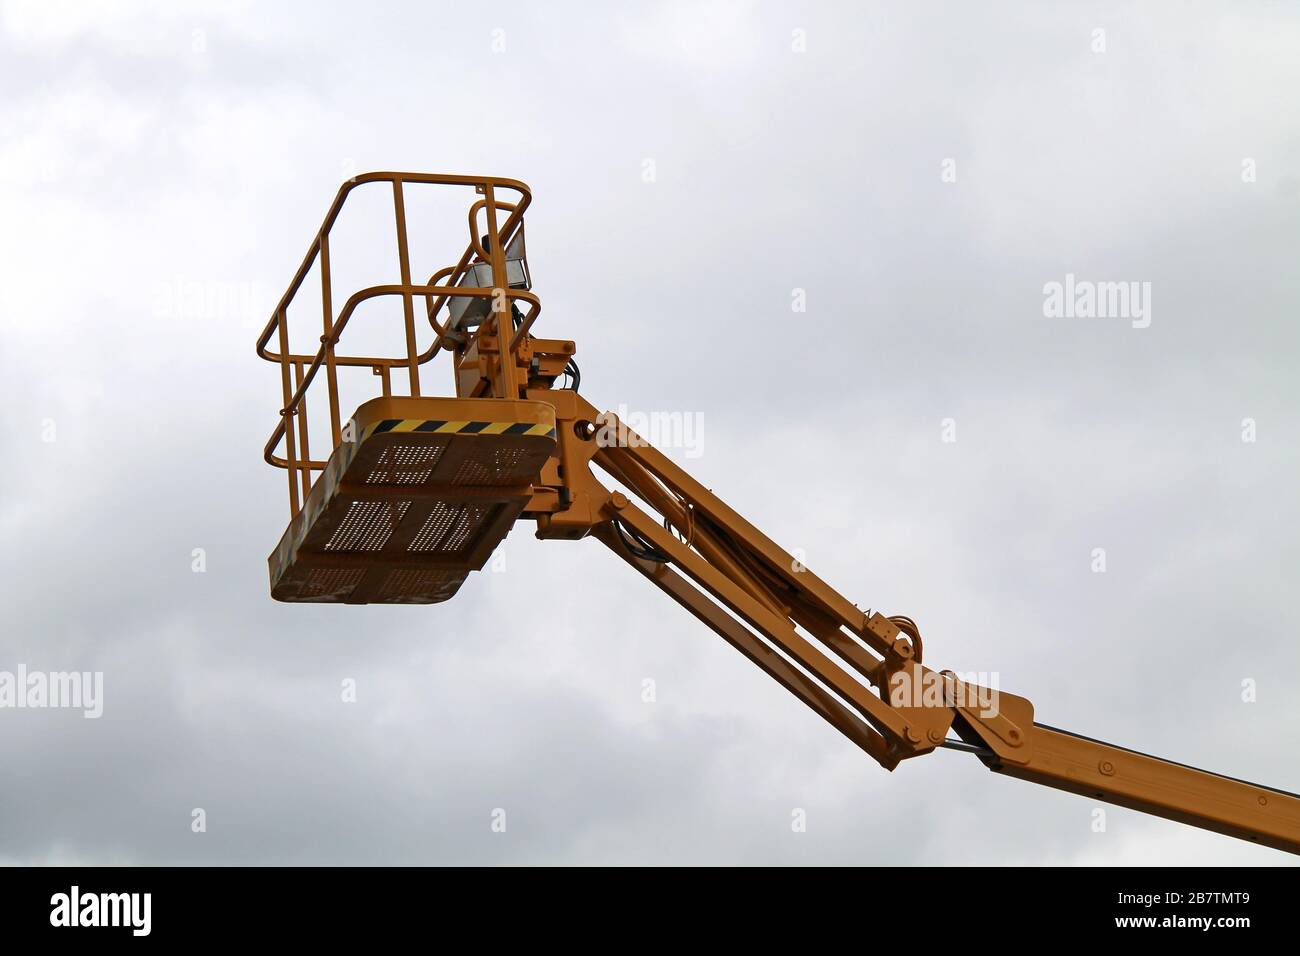 The Cage and Arm of an Hydraulic Lift Cherry Picker. Stock Photo